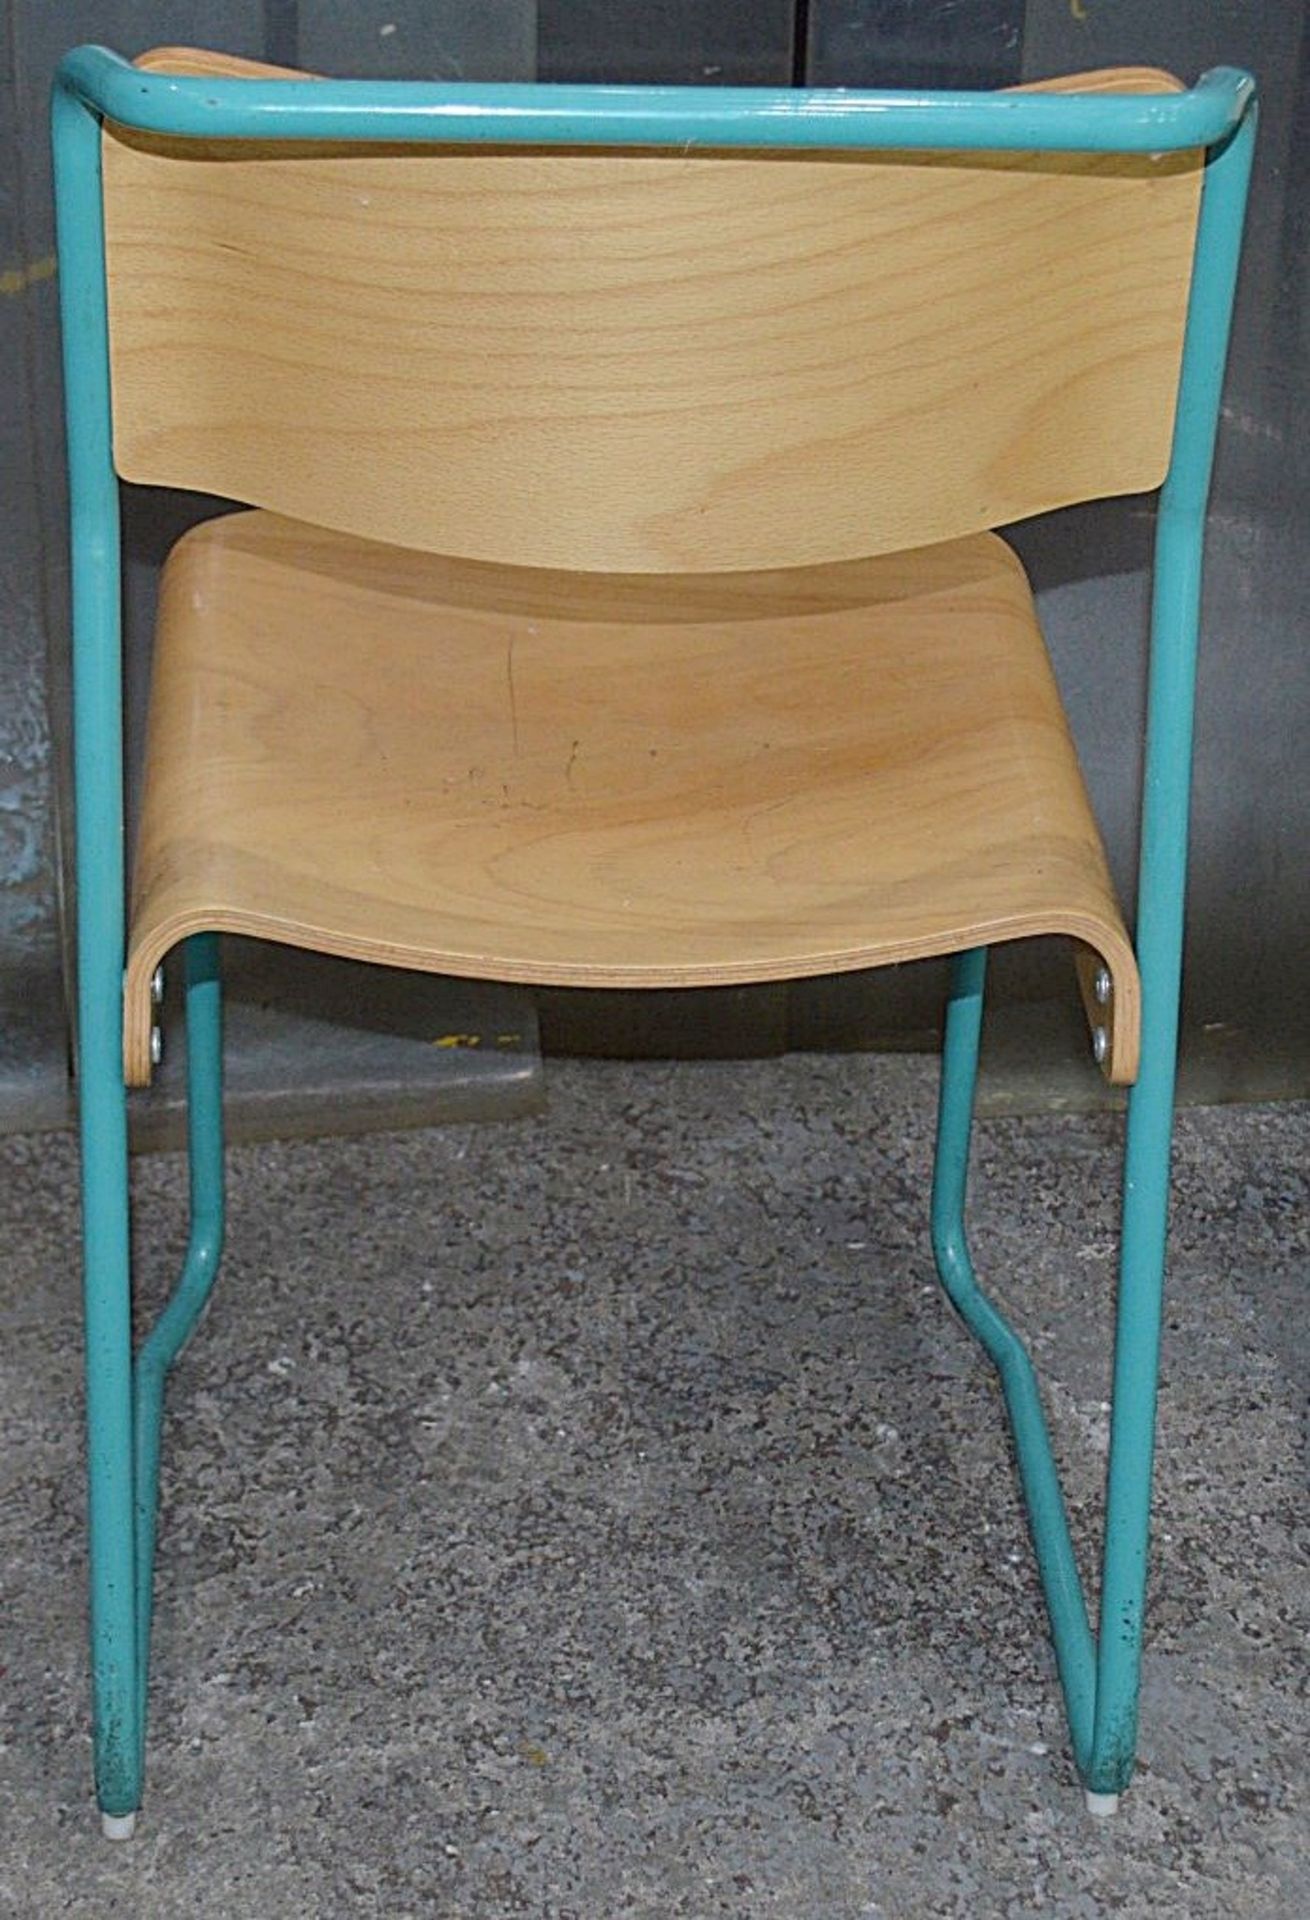 12 x Contemporary Stackable Bistro / Bar Chairs With Metal Frames In Teal With Curved Vanished - Image 9 of 11